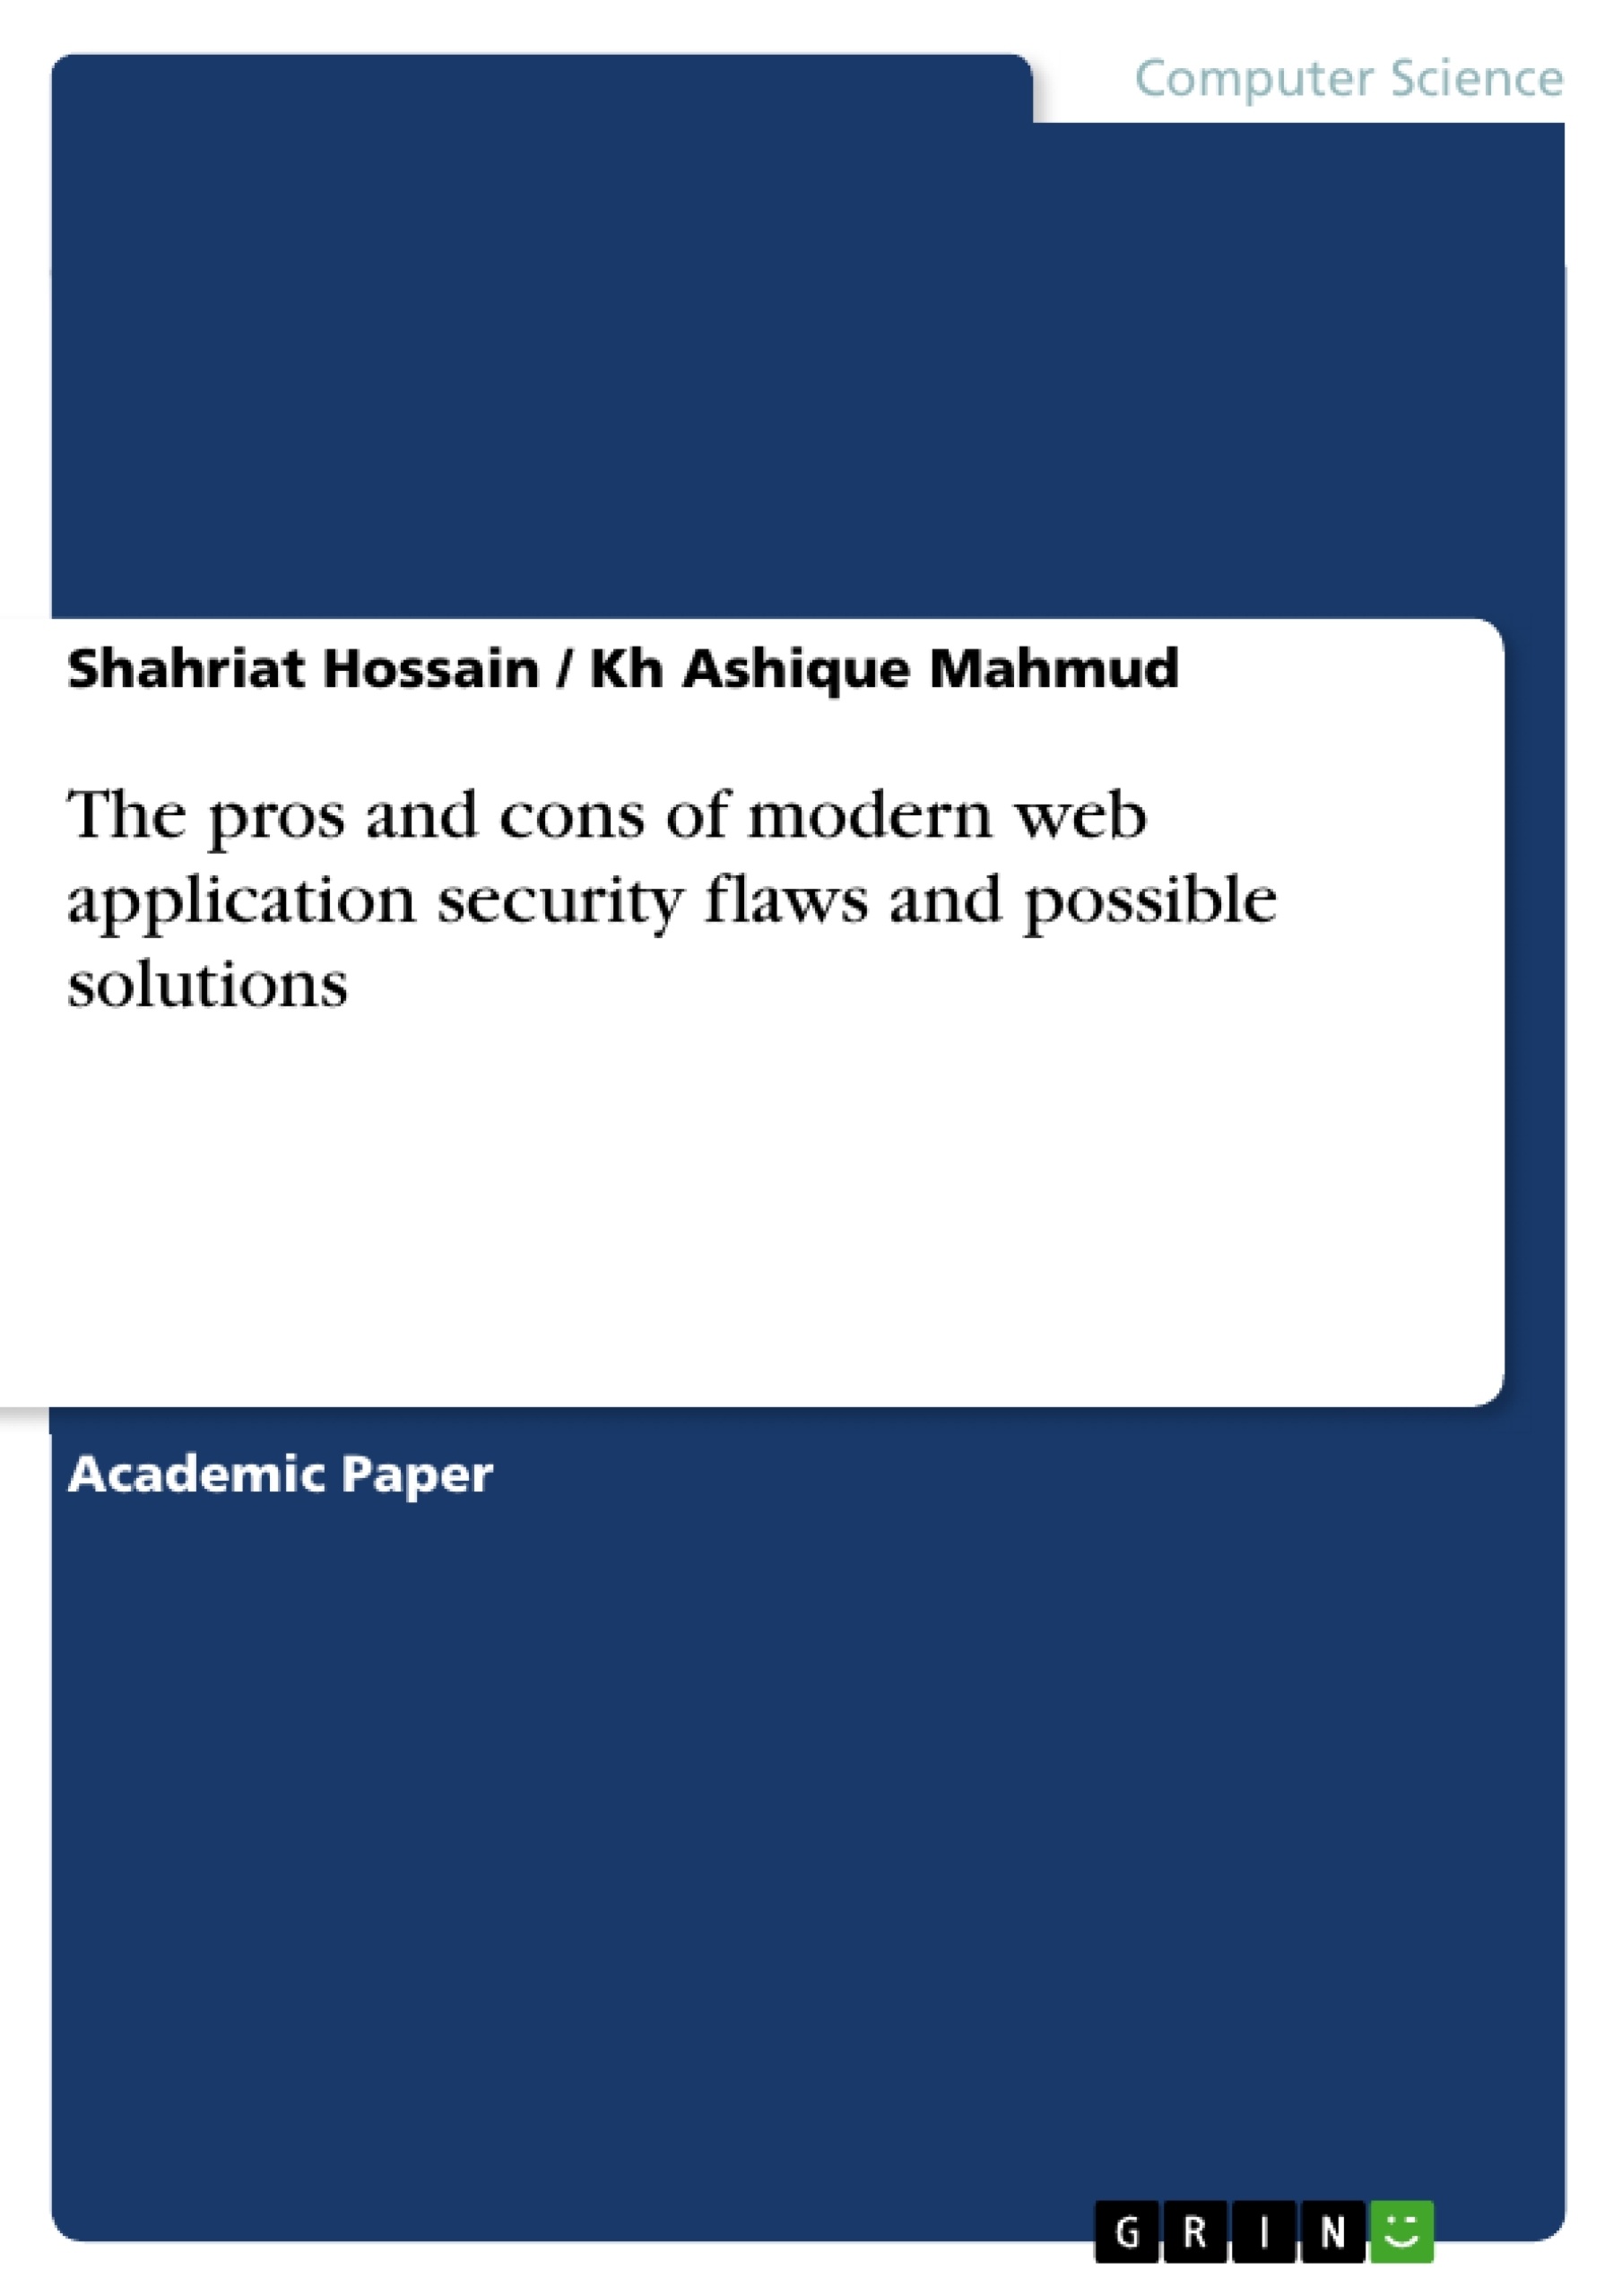 Titre: The pros and cons of modern web application security flaws and possible solutions